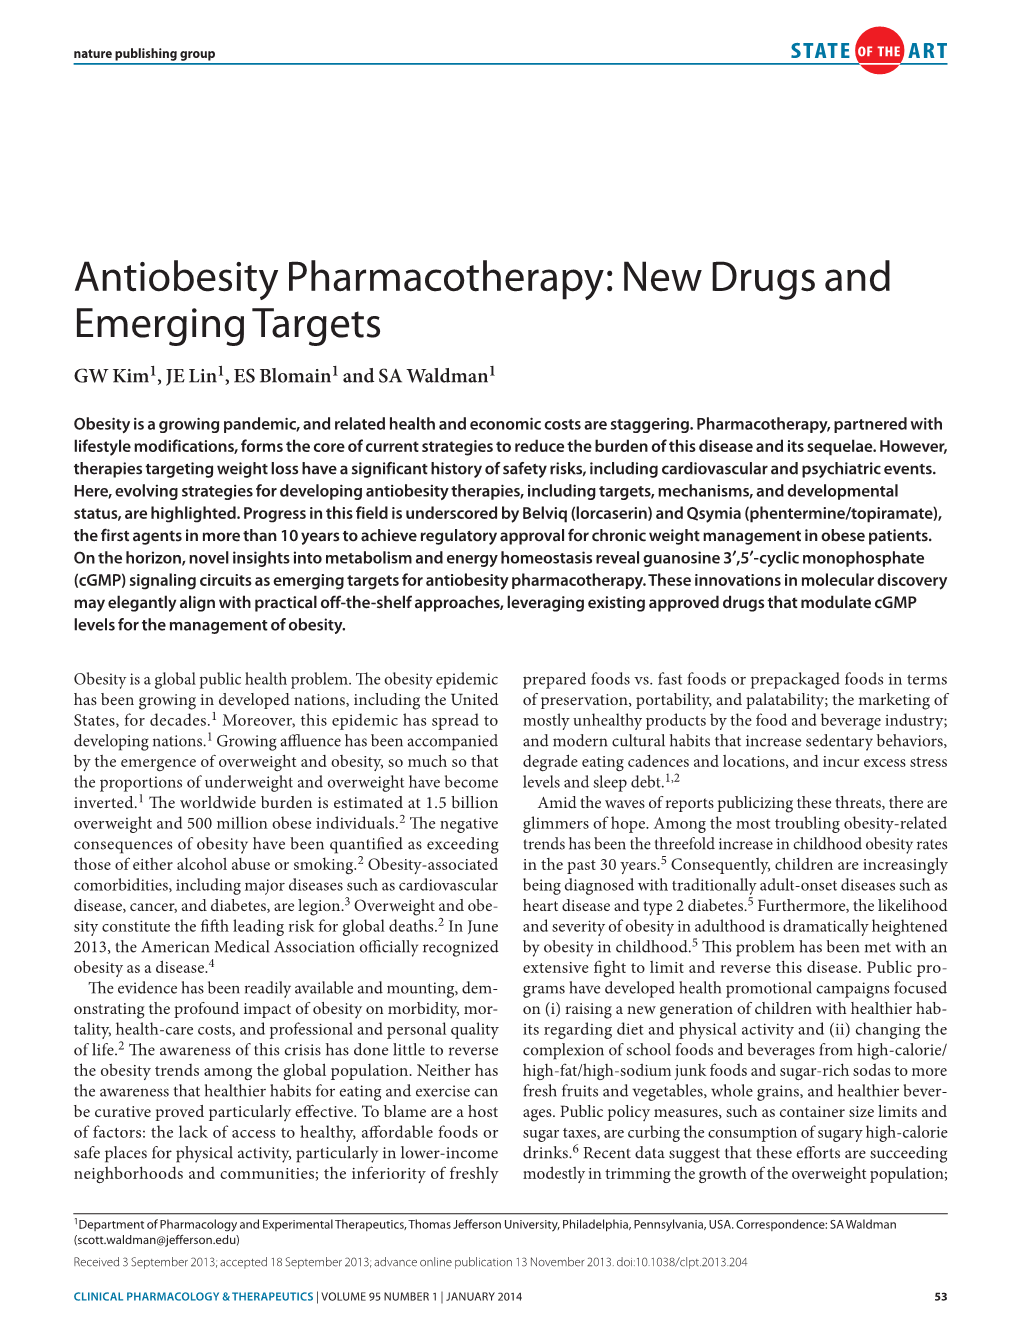 Antiobesity Pharmacotherapy: New Drugs and Emerging Targets